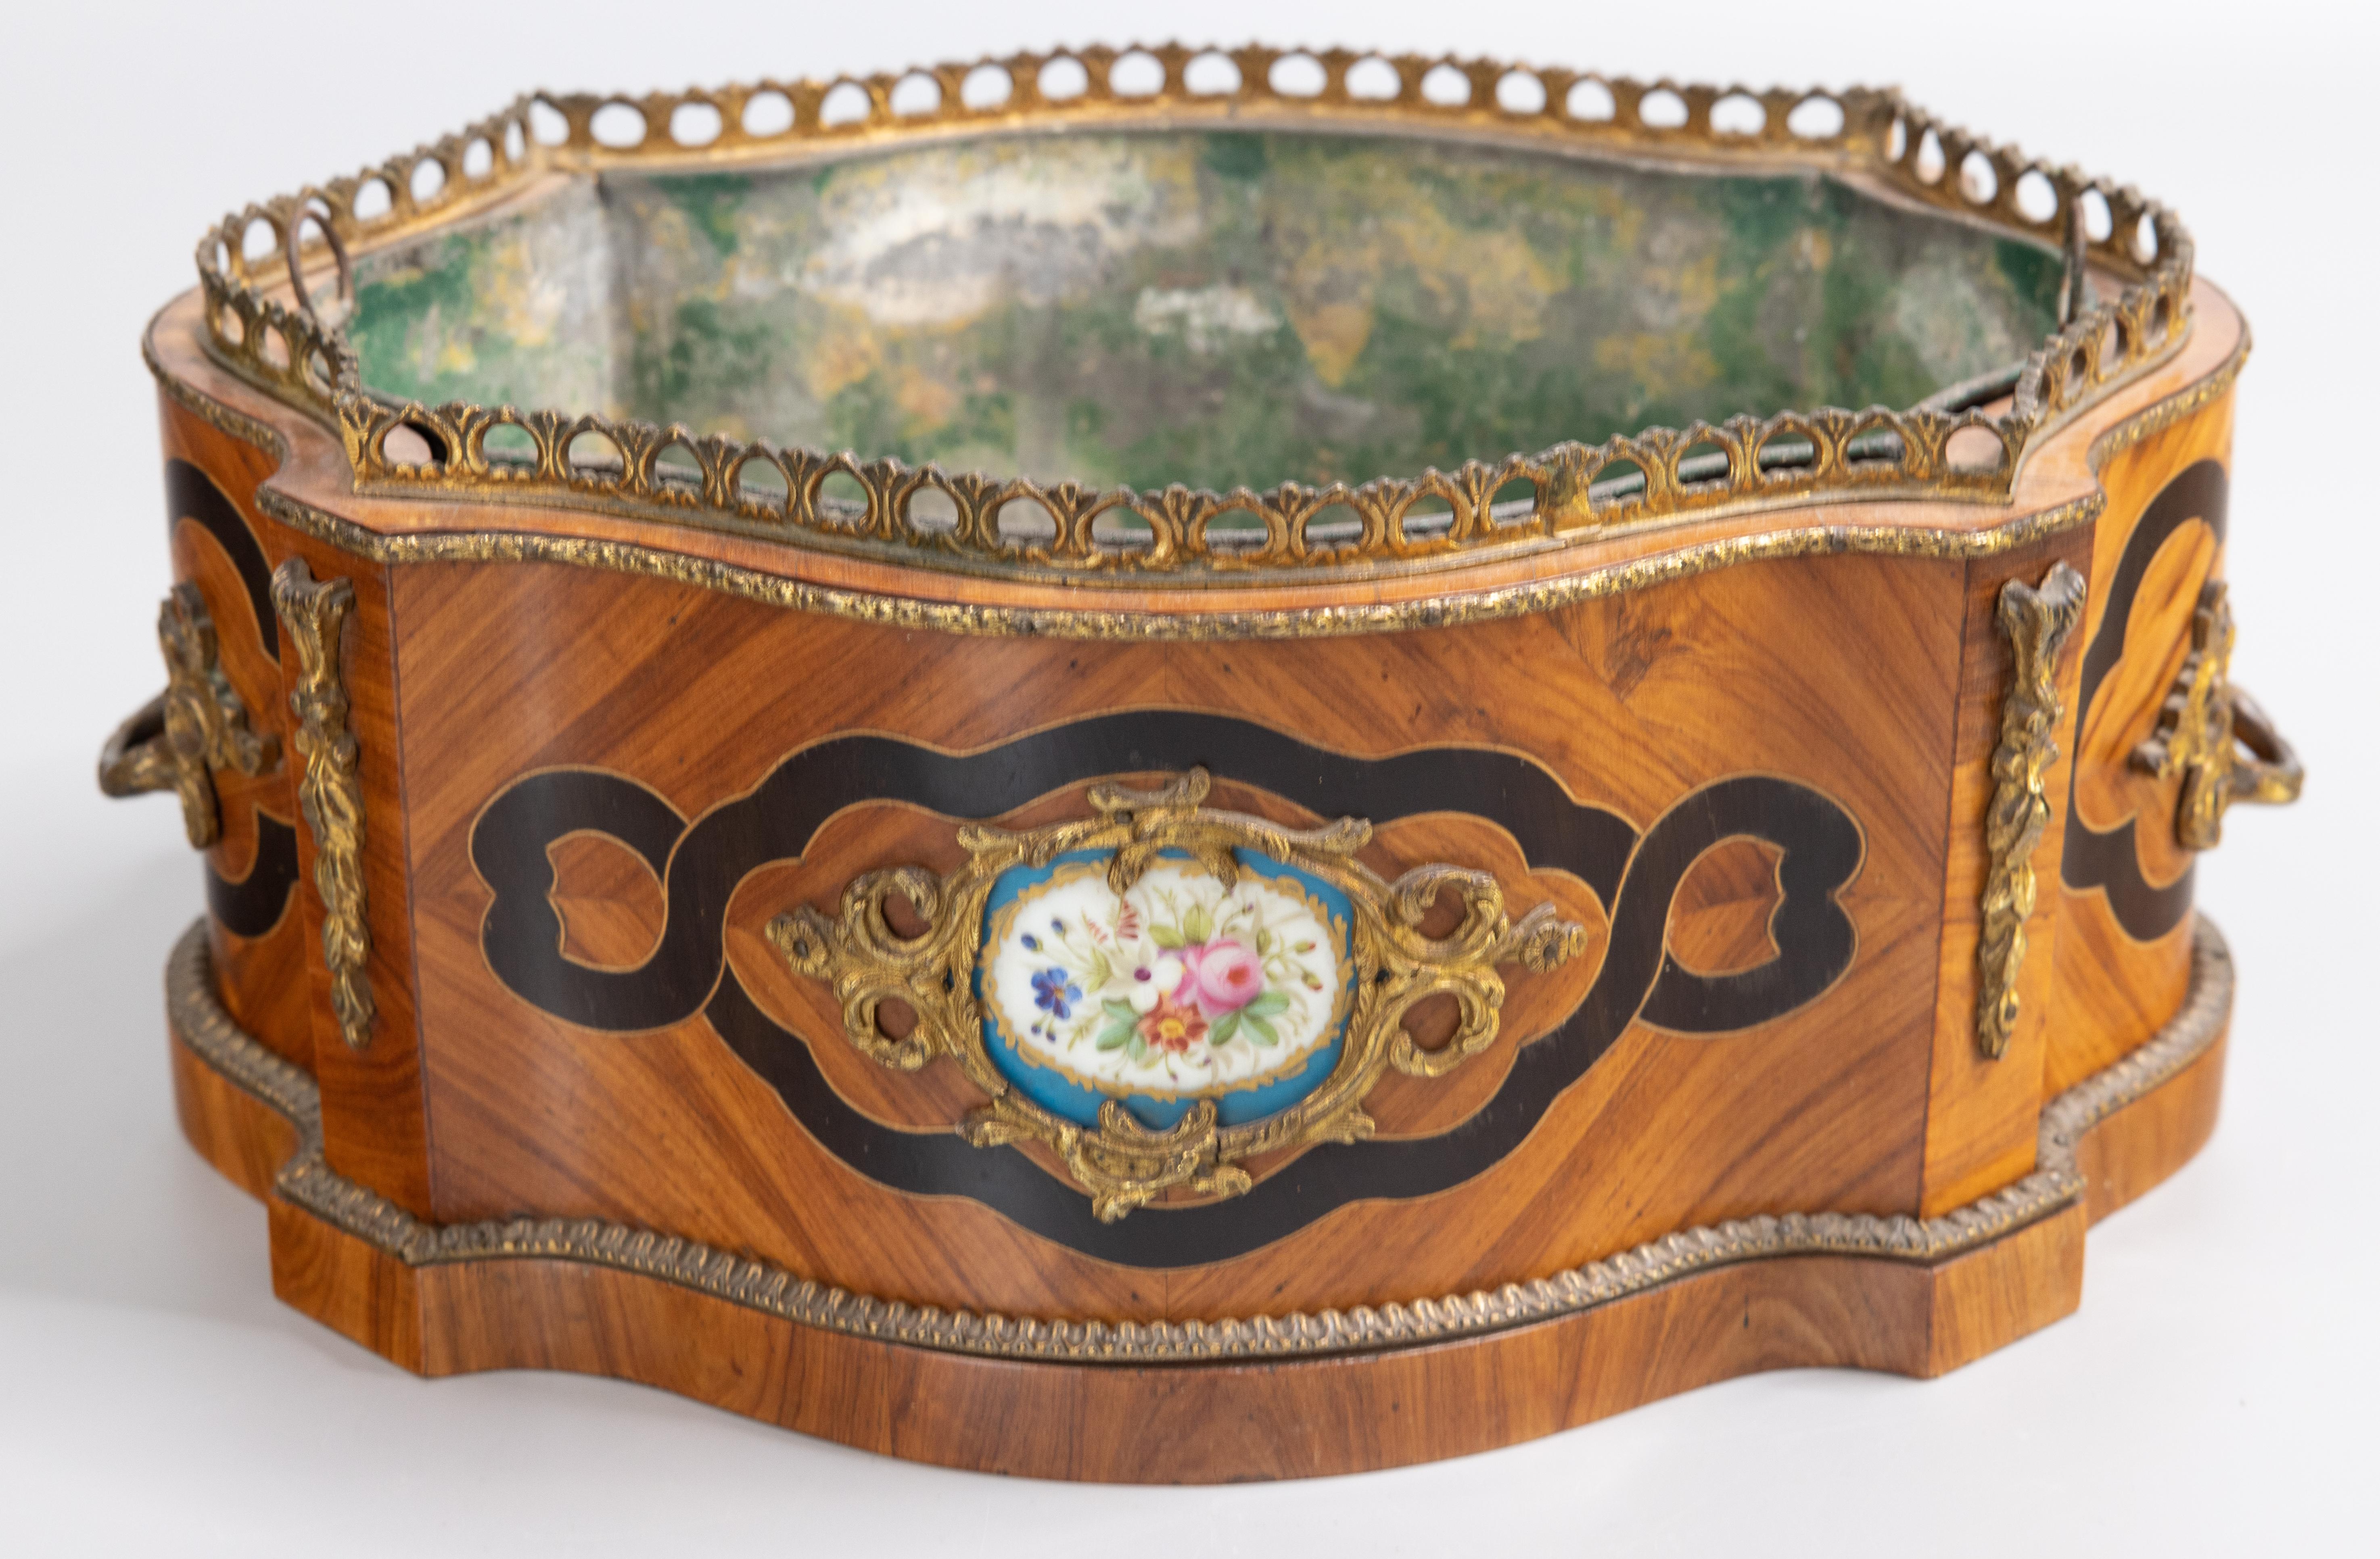 A gorgeous antique French Napoleon III period marquetry walnut oval bombe table jardiniere / bloom box / cachepot / planter with the original tin liner, circa 1860. This beautiful jardiniere is hand crafted with walnut inlaid with ebony and